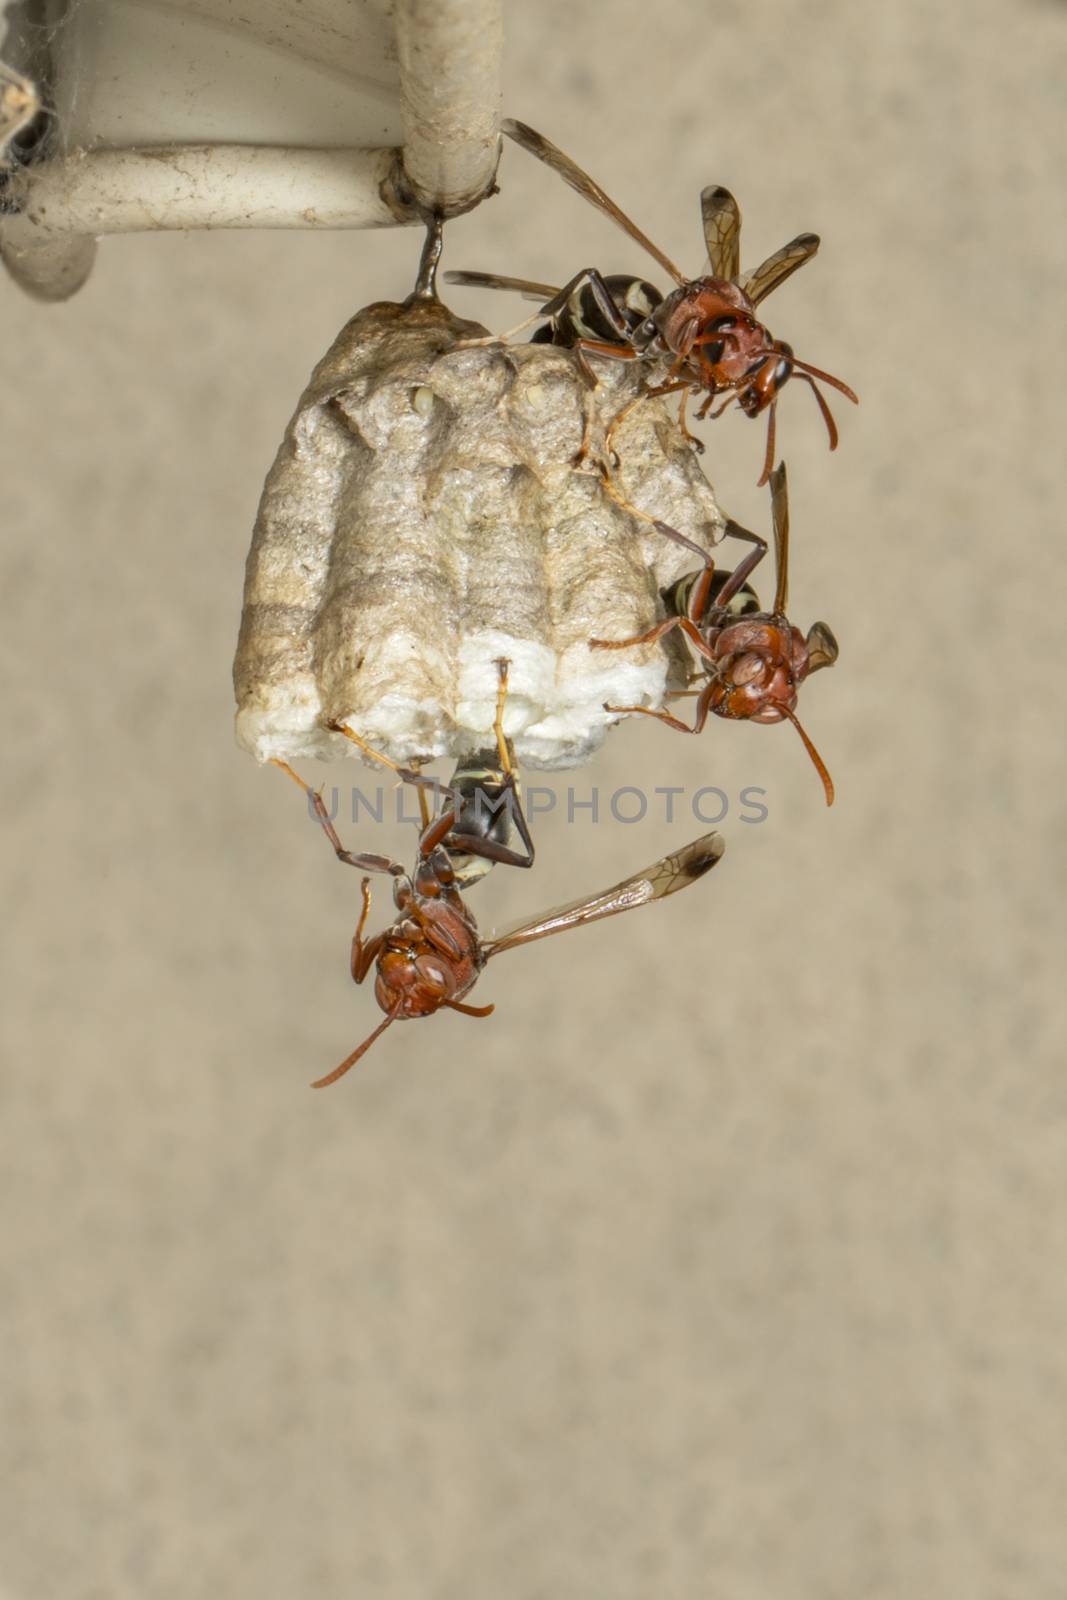 Image of Common Paper Wasp / Ropalidia fasciata and wasp nest on by yod67